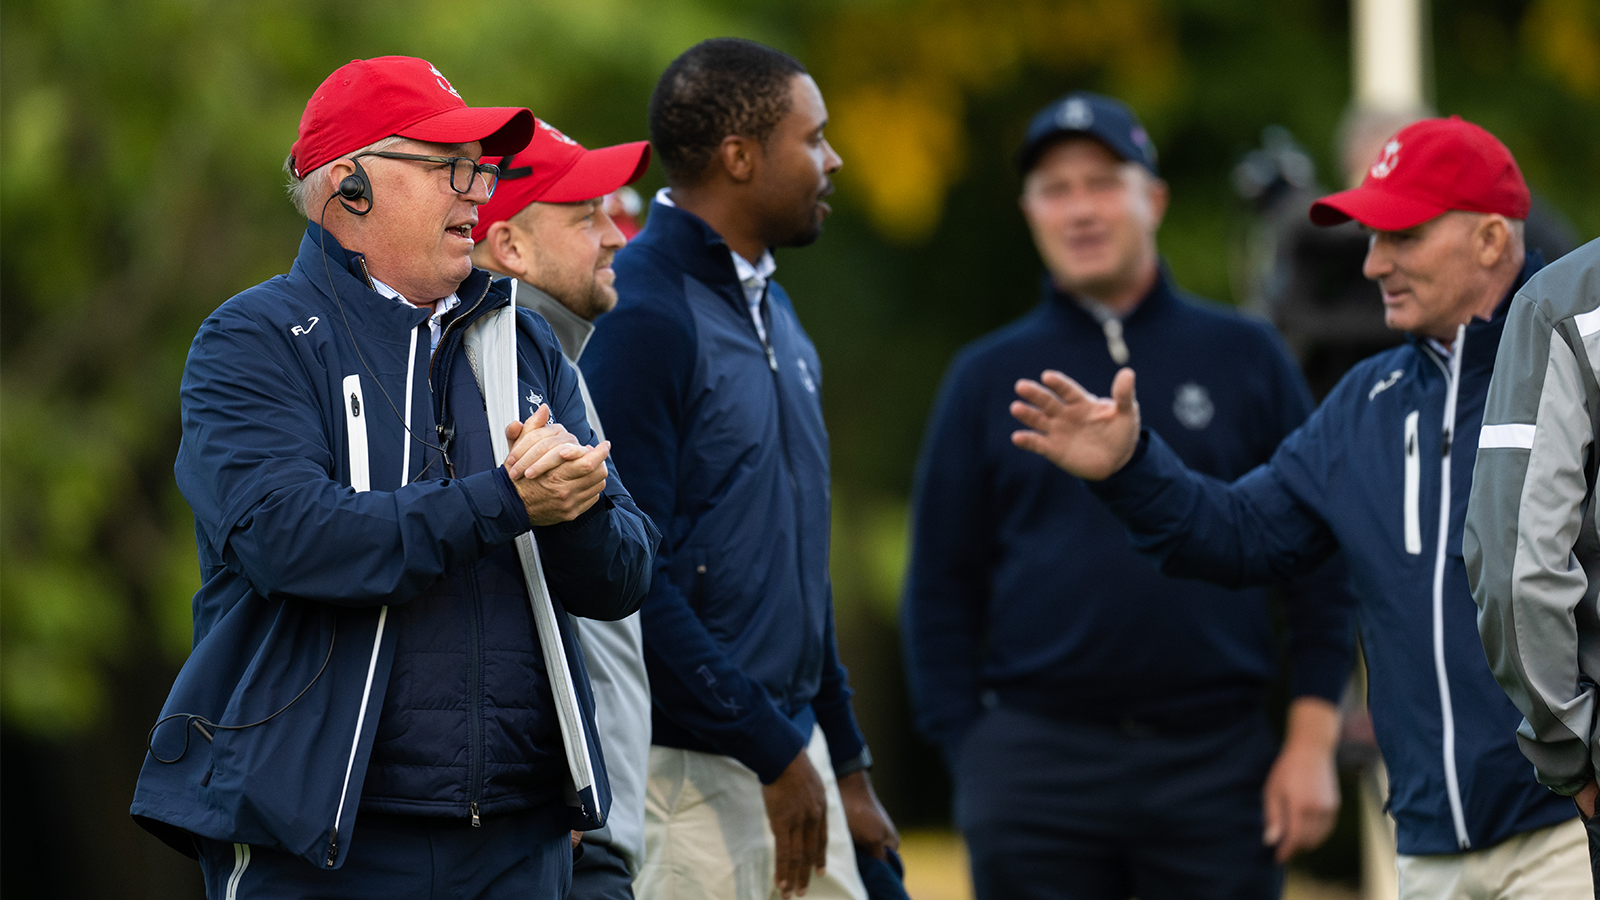 PGA of America President, Jim Richerson during afternoon foursome matches for the 30th PGA Cup at Foxhills Golf Club on September 16, 2022 in Ottershaw, England. (Photo by Matthew Harris/PGA of America)